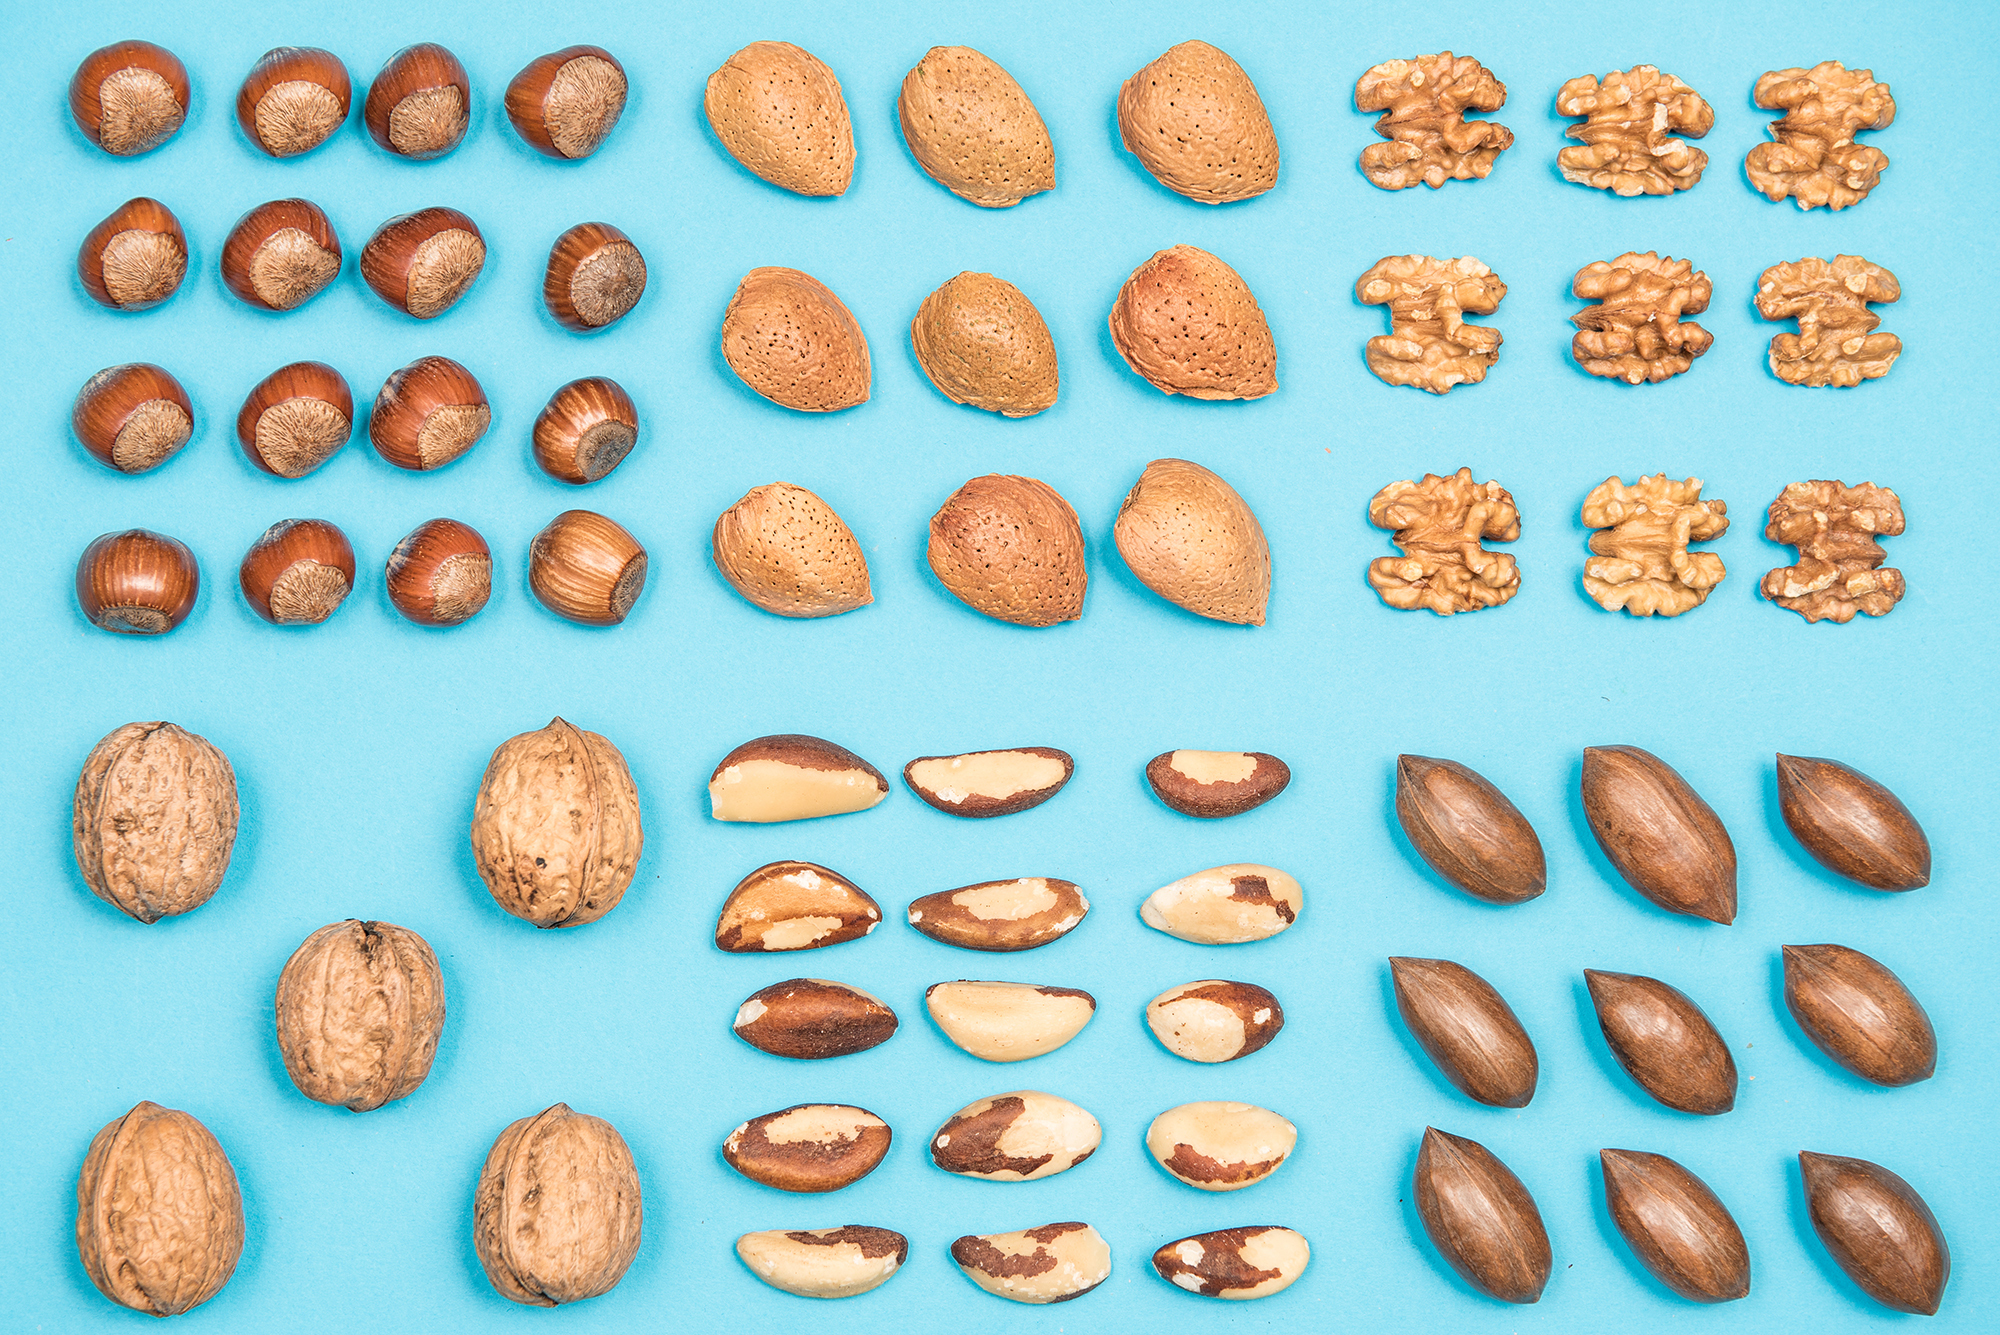 On the flip side, the study found that diets containing low amounts of nuts and seeds were linked to about 9 percent of deaths from heart disease and Type 2 diabetes.